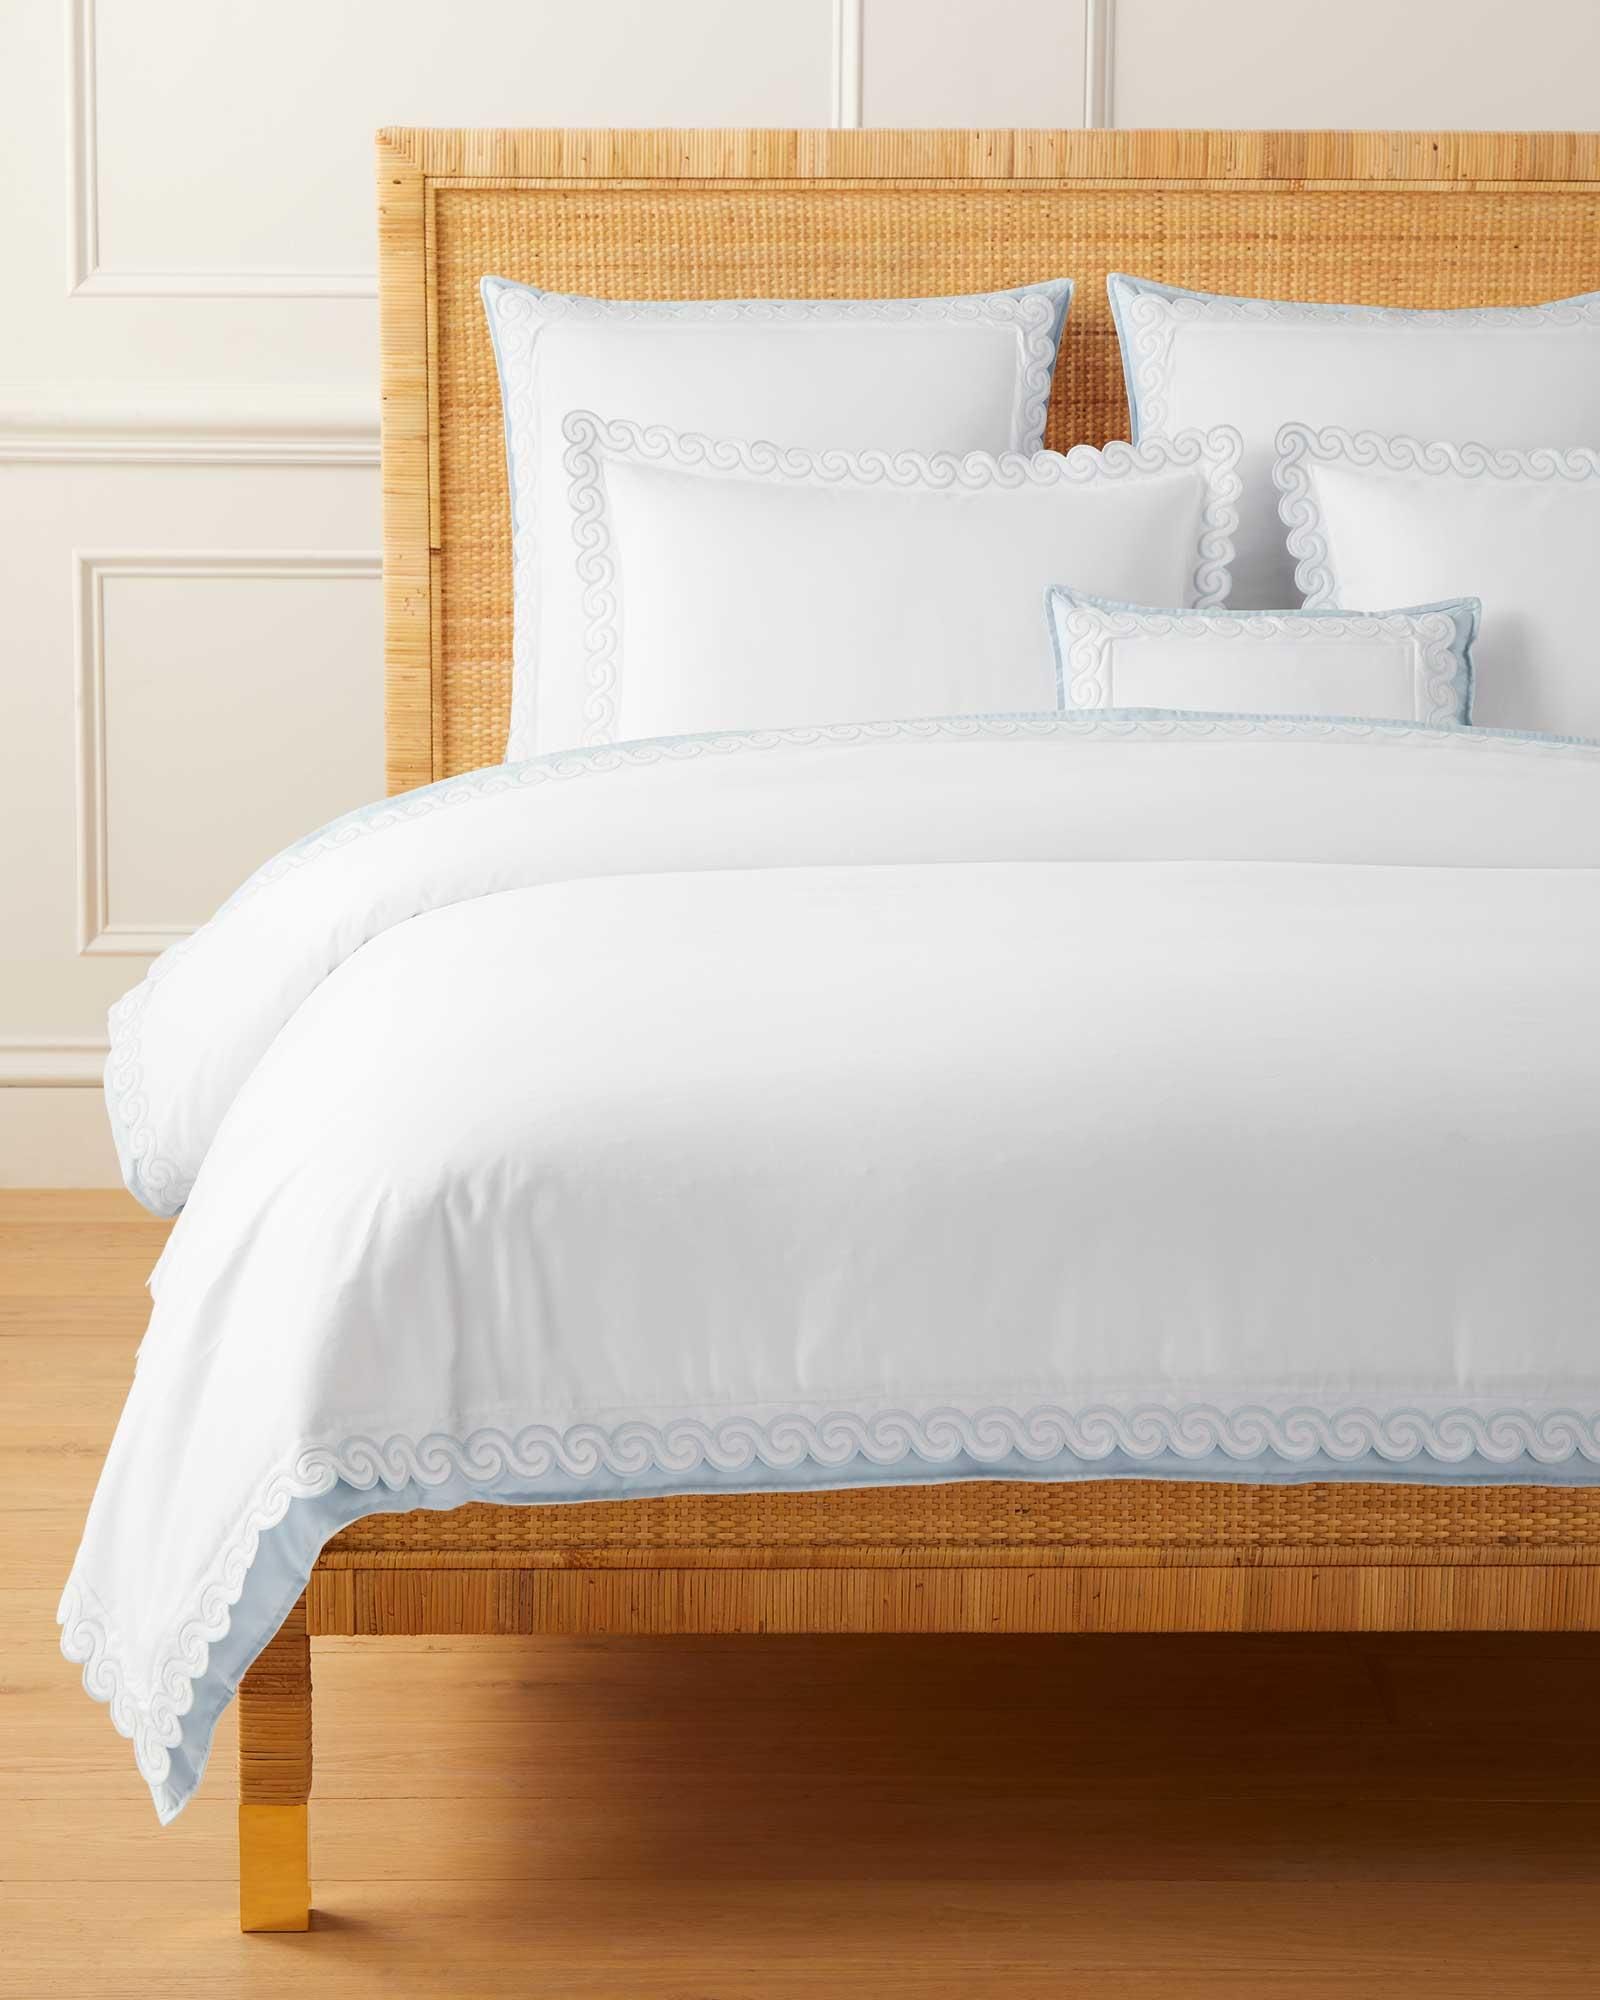 Cape May Sateen Duvet Cover | Serena and Lily